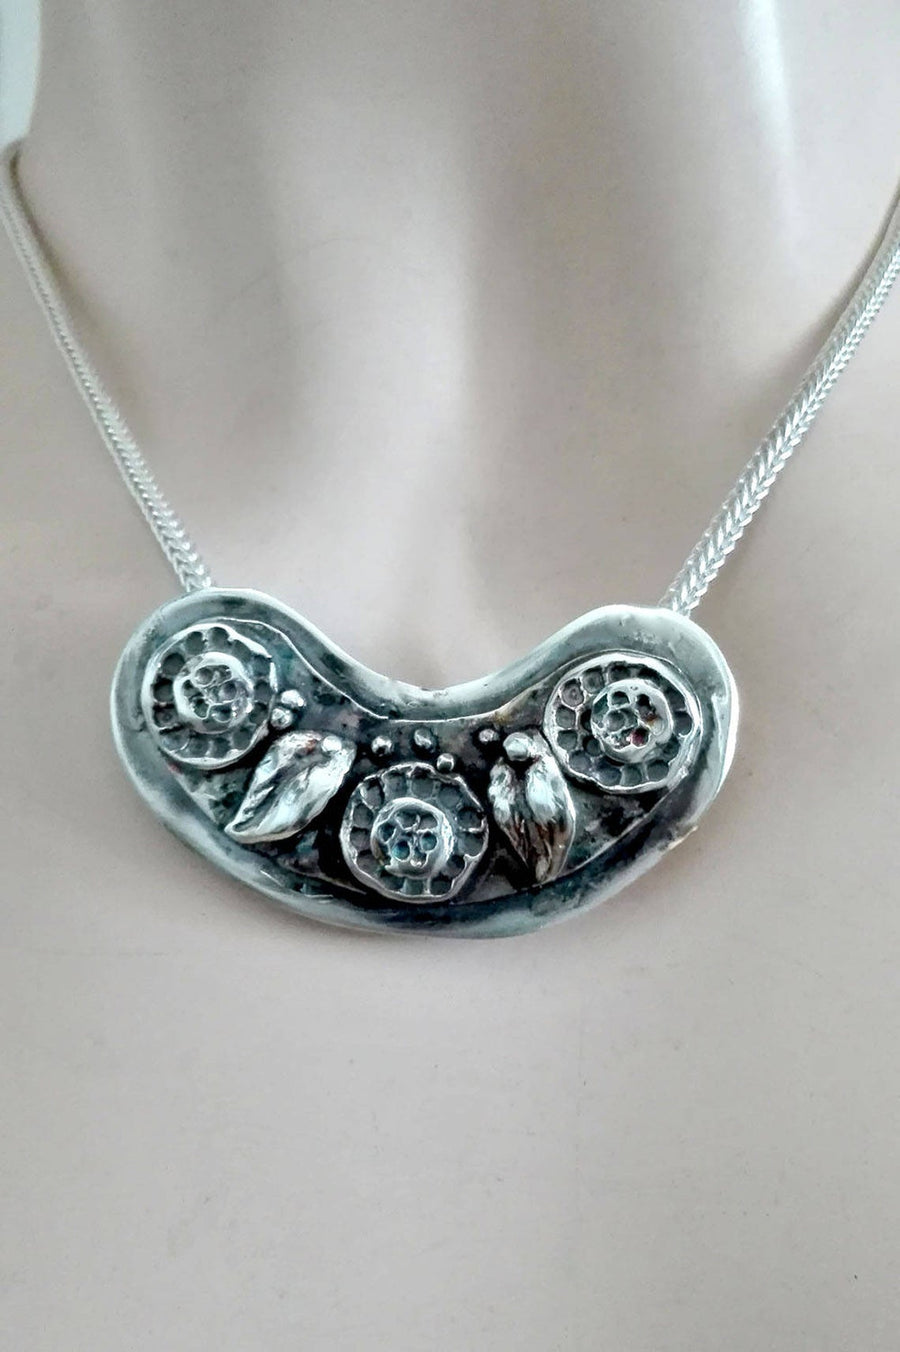 Nature Inspired Necklace, Nature Pendant, Garden Necklace, Sculpted Pendant, Sterling Silver Jewelry, Chunky Pendant, Statement